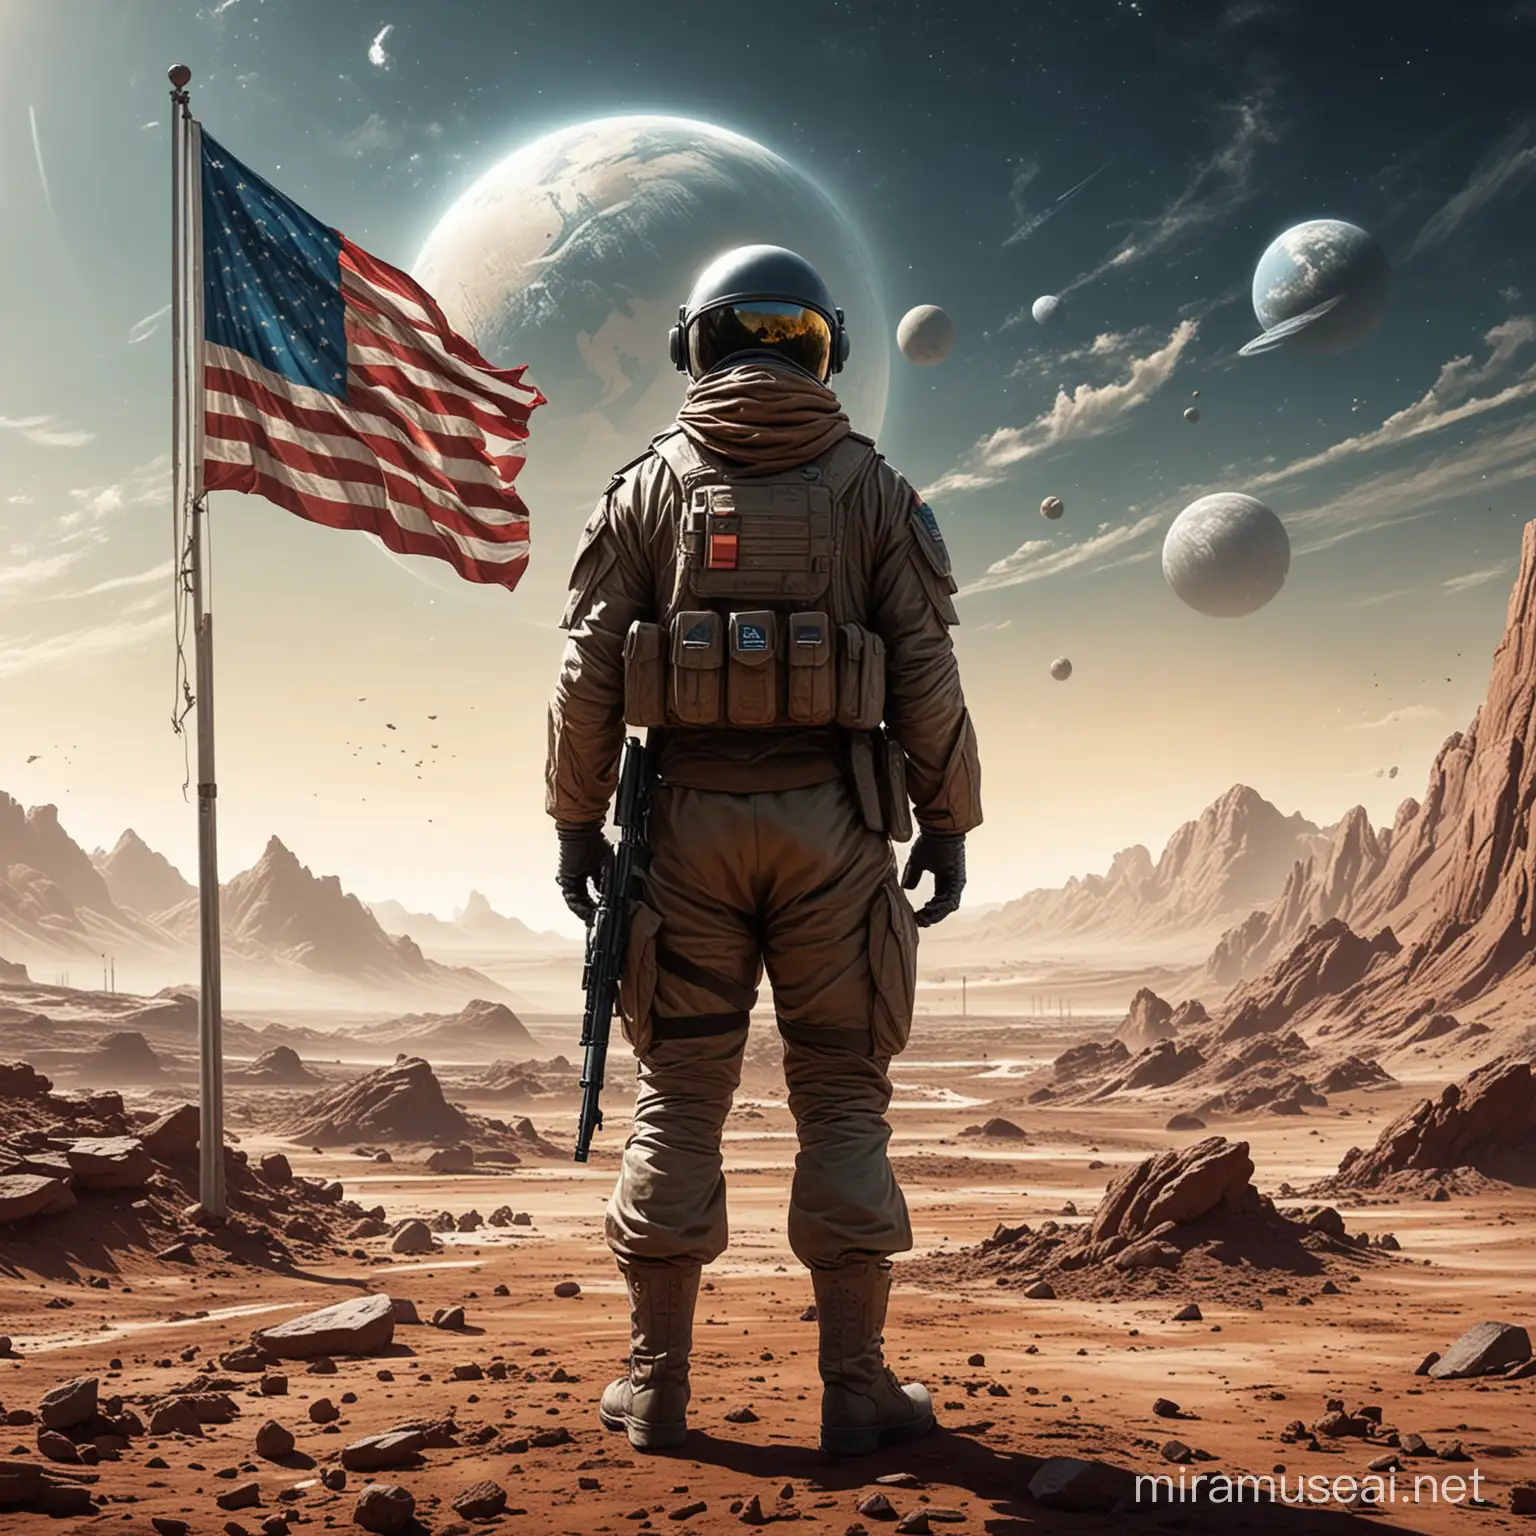 Concept of art work is 1 color : Military Space Solider standing over a battle field. The face can be Covered with a helmet. Behind him is a Flag of what can be assumed to be Super Earth or Earth home Planet.